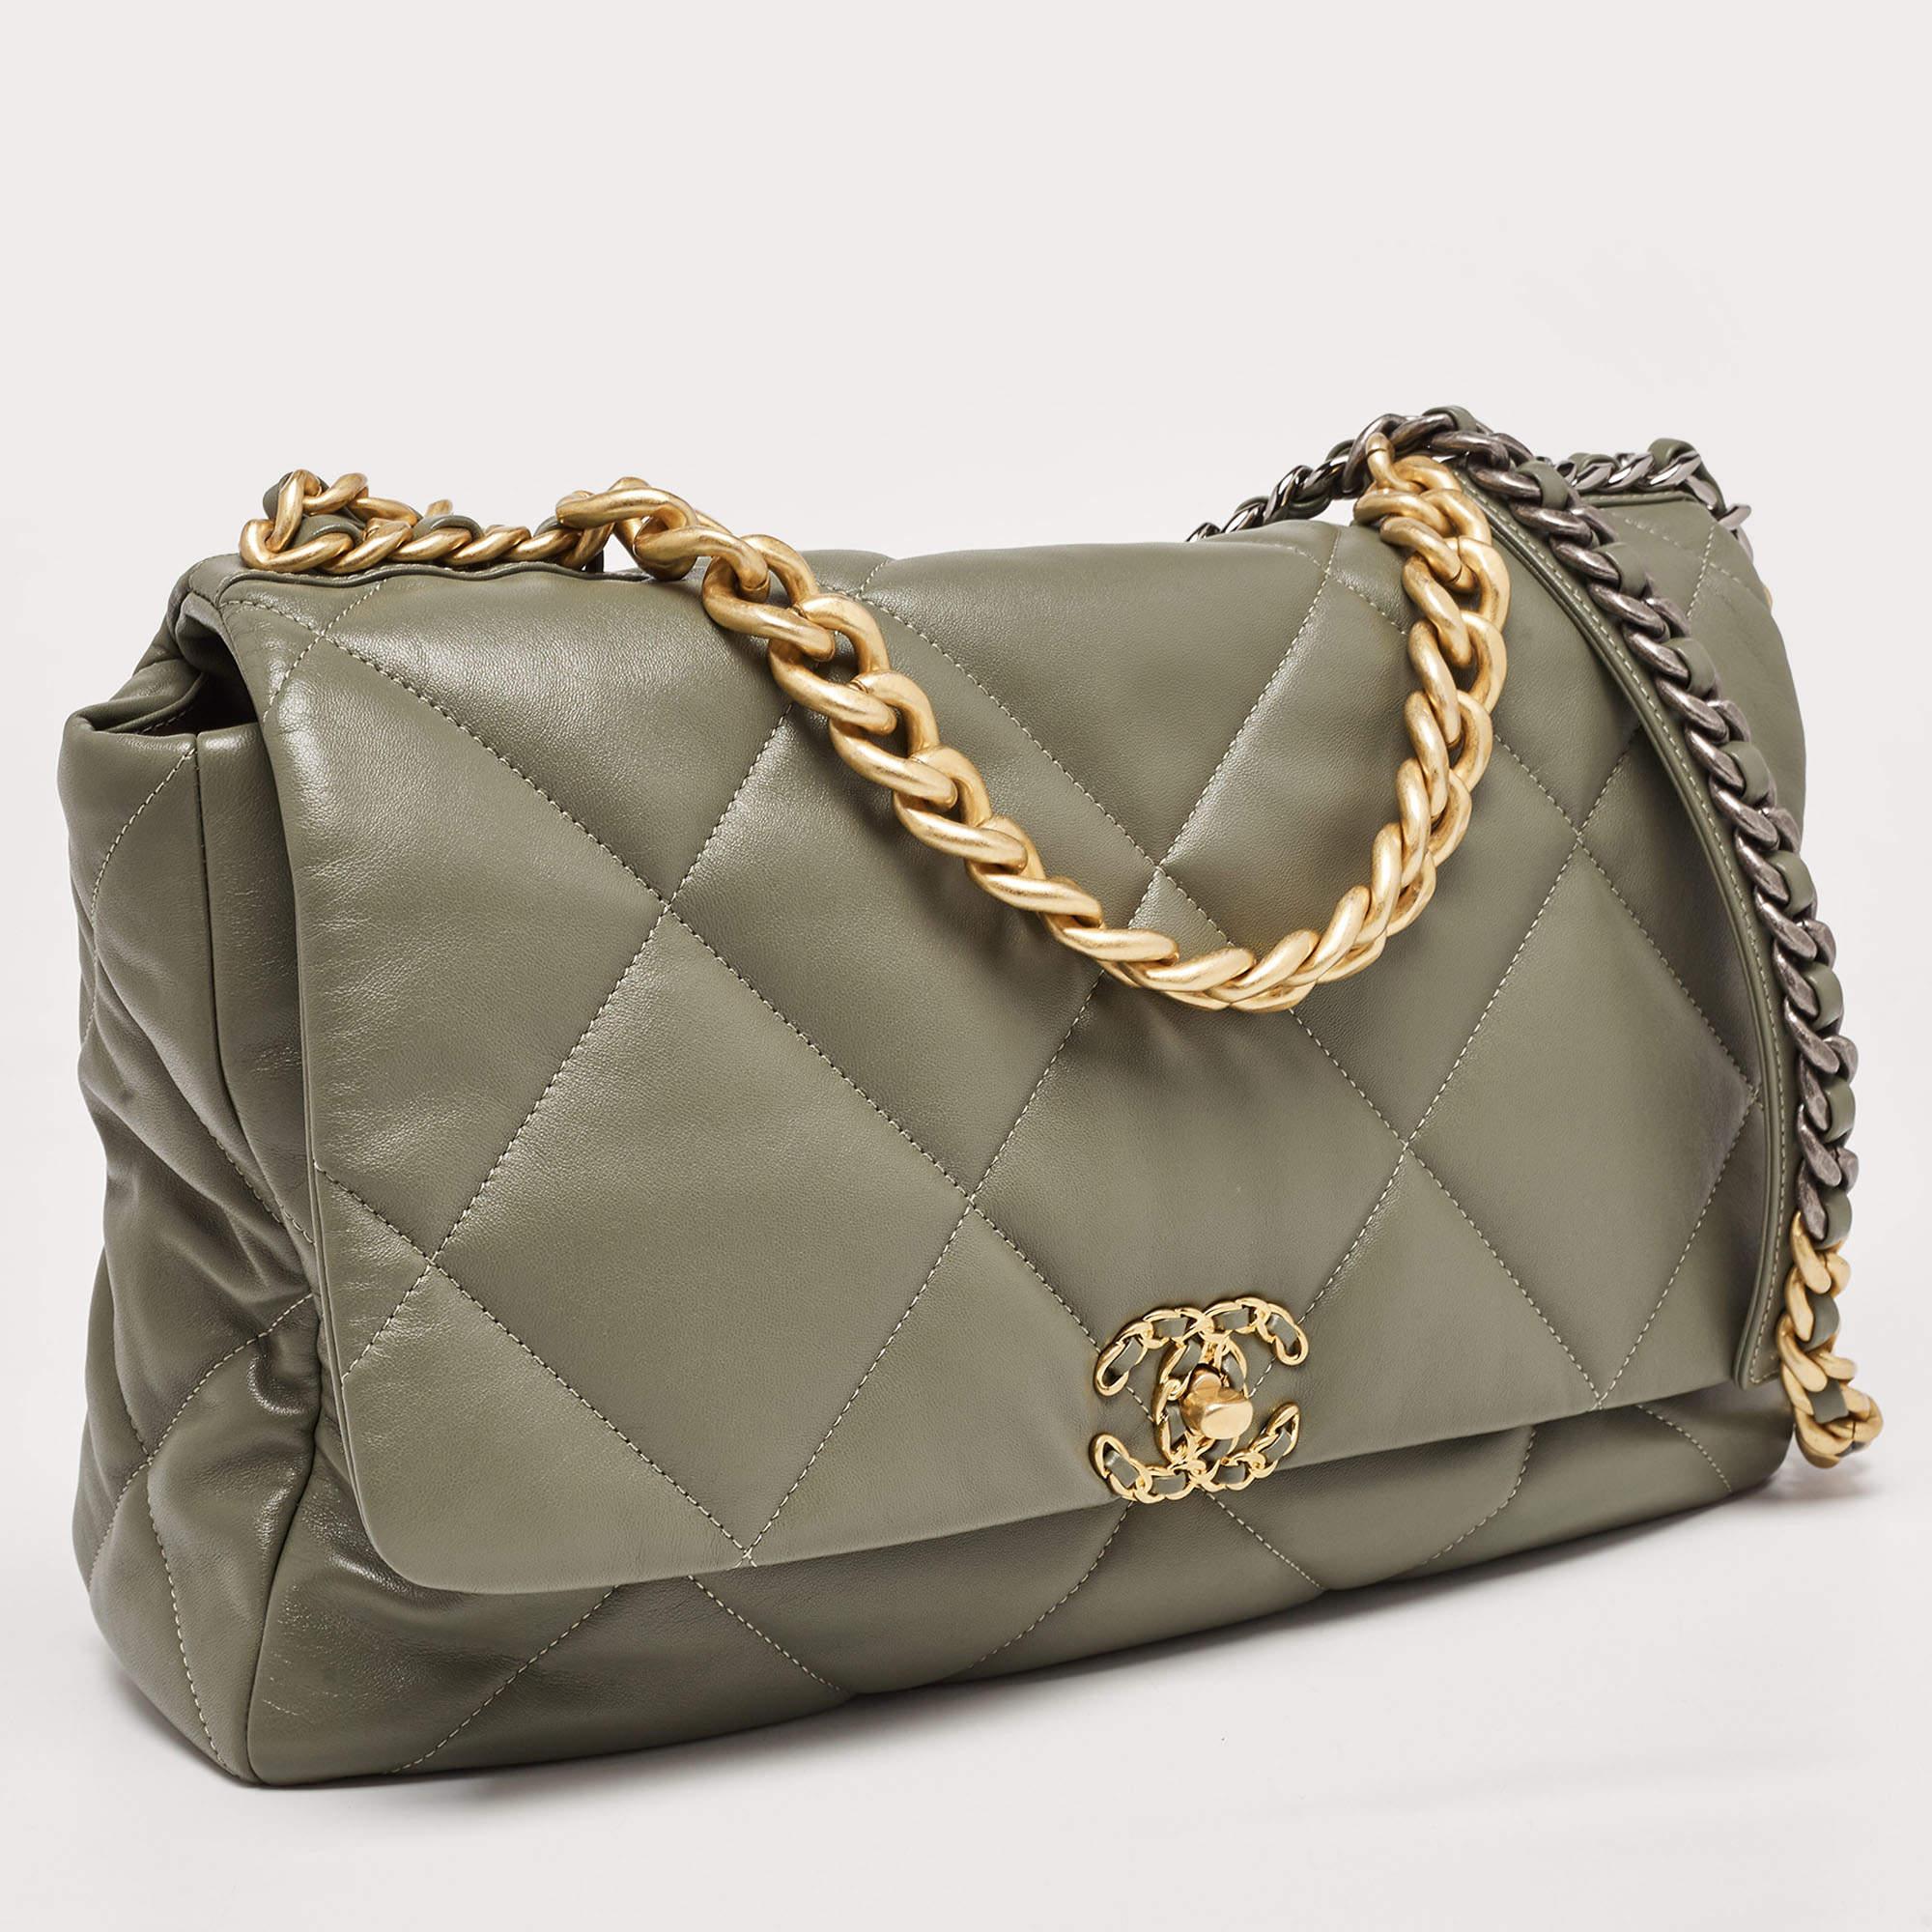 First unveiled in the Chanel Fall 2019 collection, the Chanel 19 bag is named after the year of its release, just like the Chanel 2.55. In design, the bag has exaggerated quilting and hardware in two tones. This version in fatigue green is made from